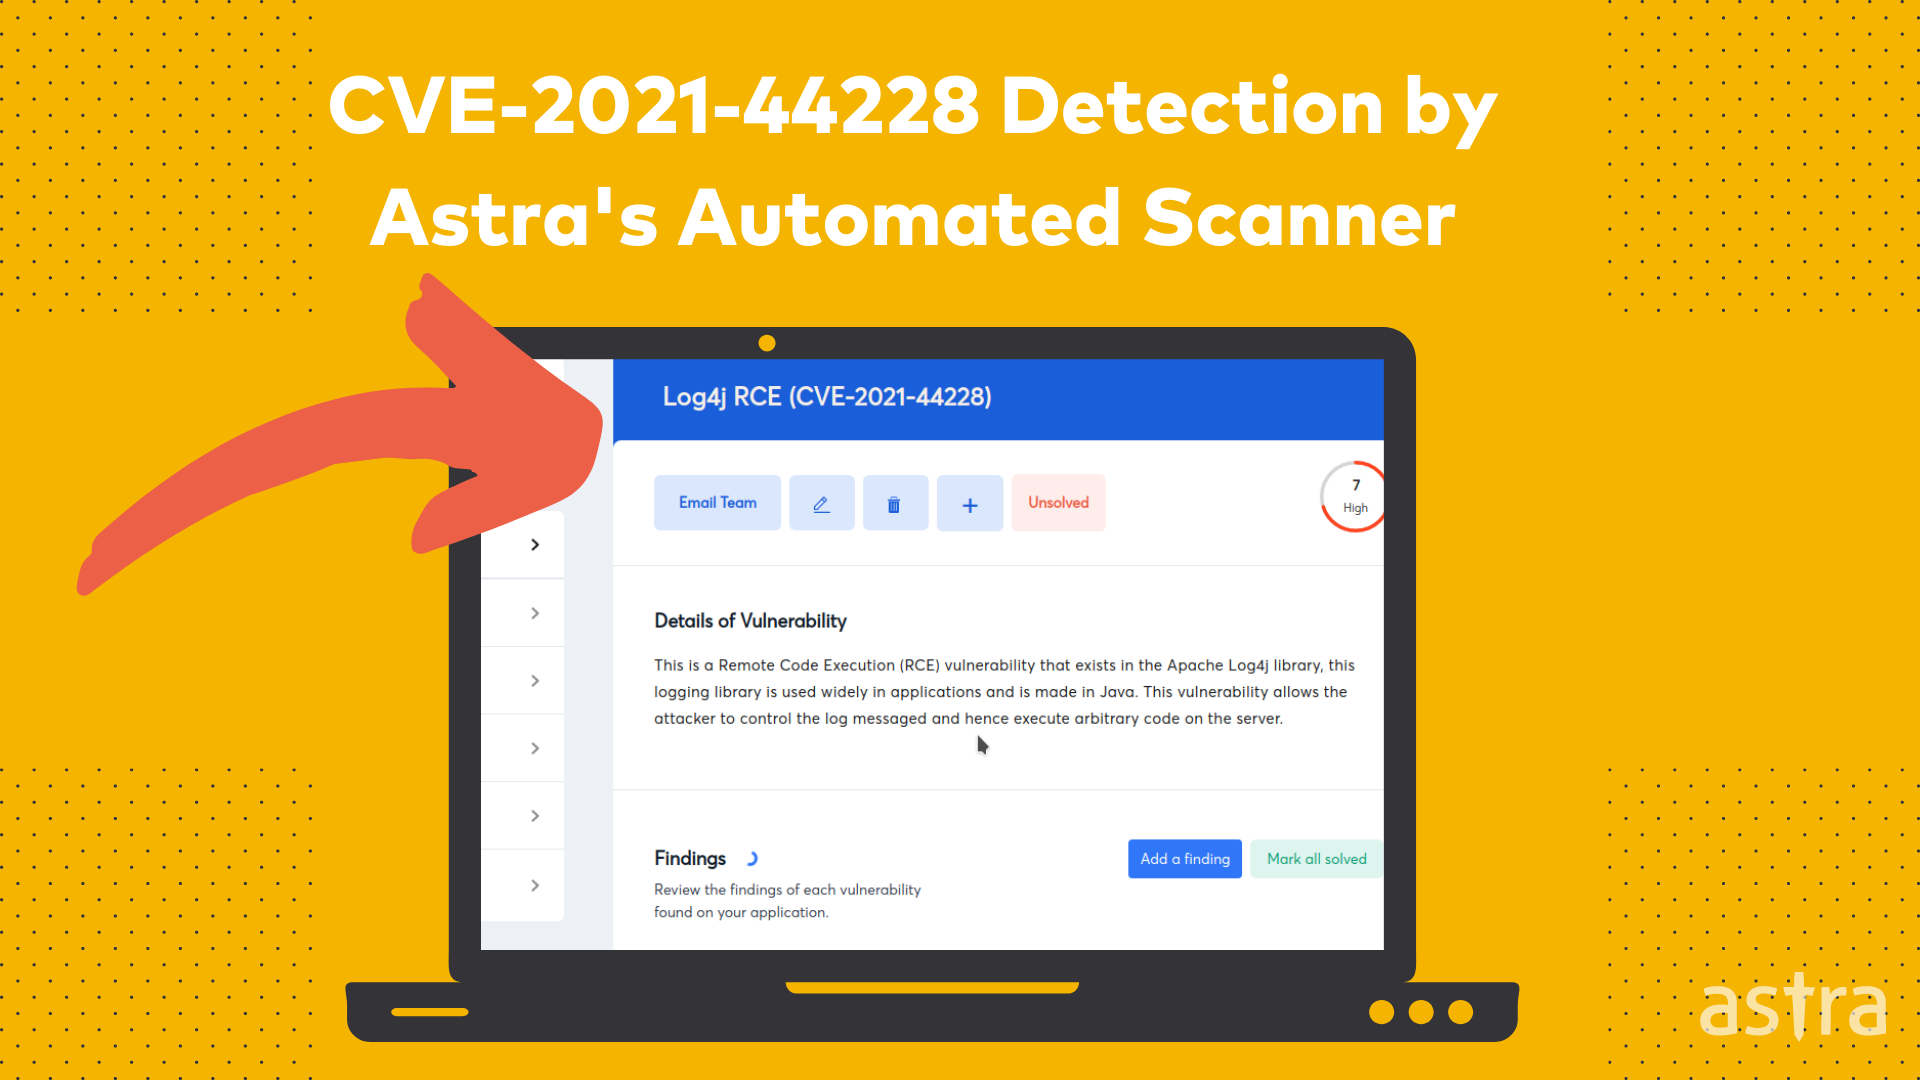 Detection of CVE-2021-44228 by Astra's Scanner